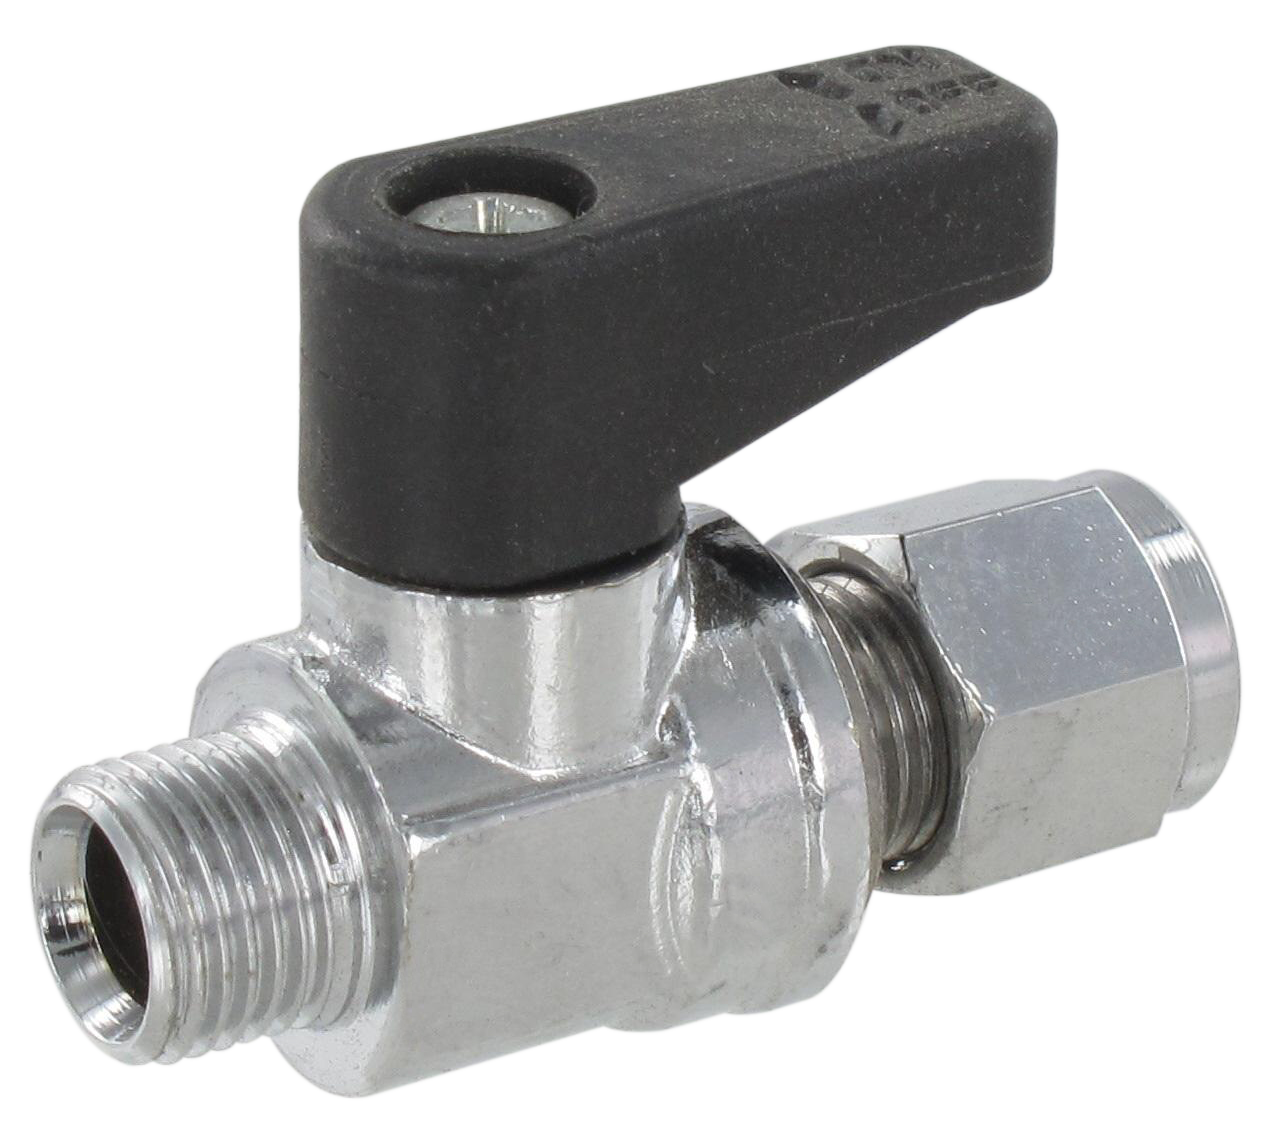 Ball valve with male/tube connection 3/8- 8 Nickel-plated brass ball valves